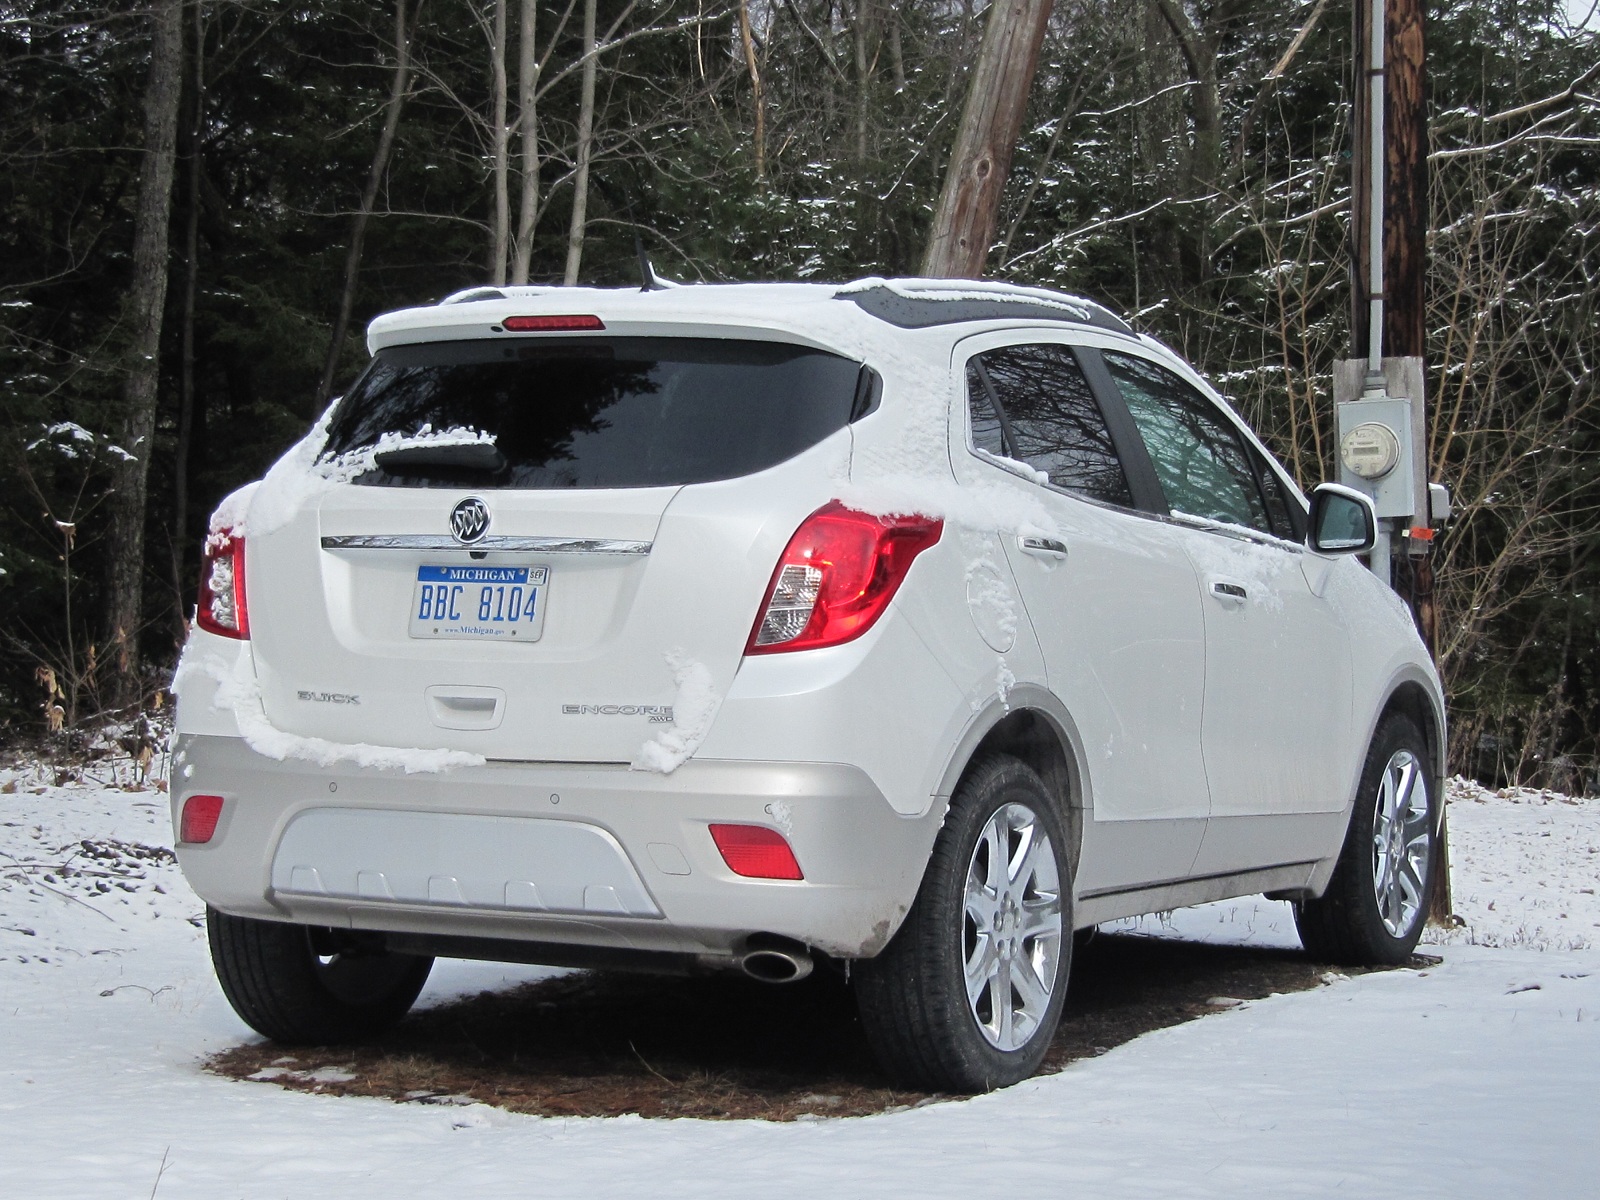 2013 Buick Encore: Subcompact Luxury Crossover, Drive Report